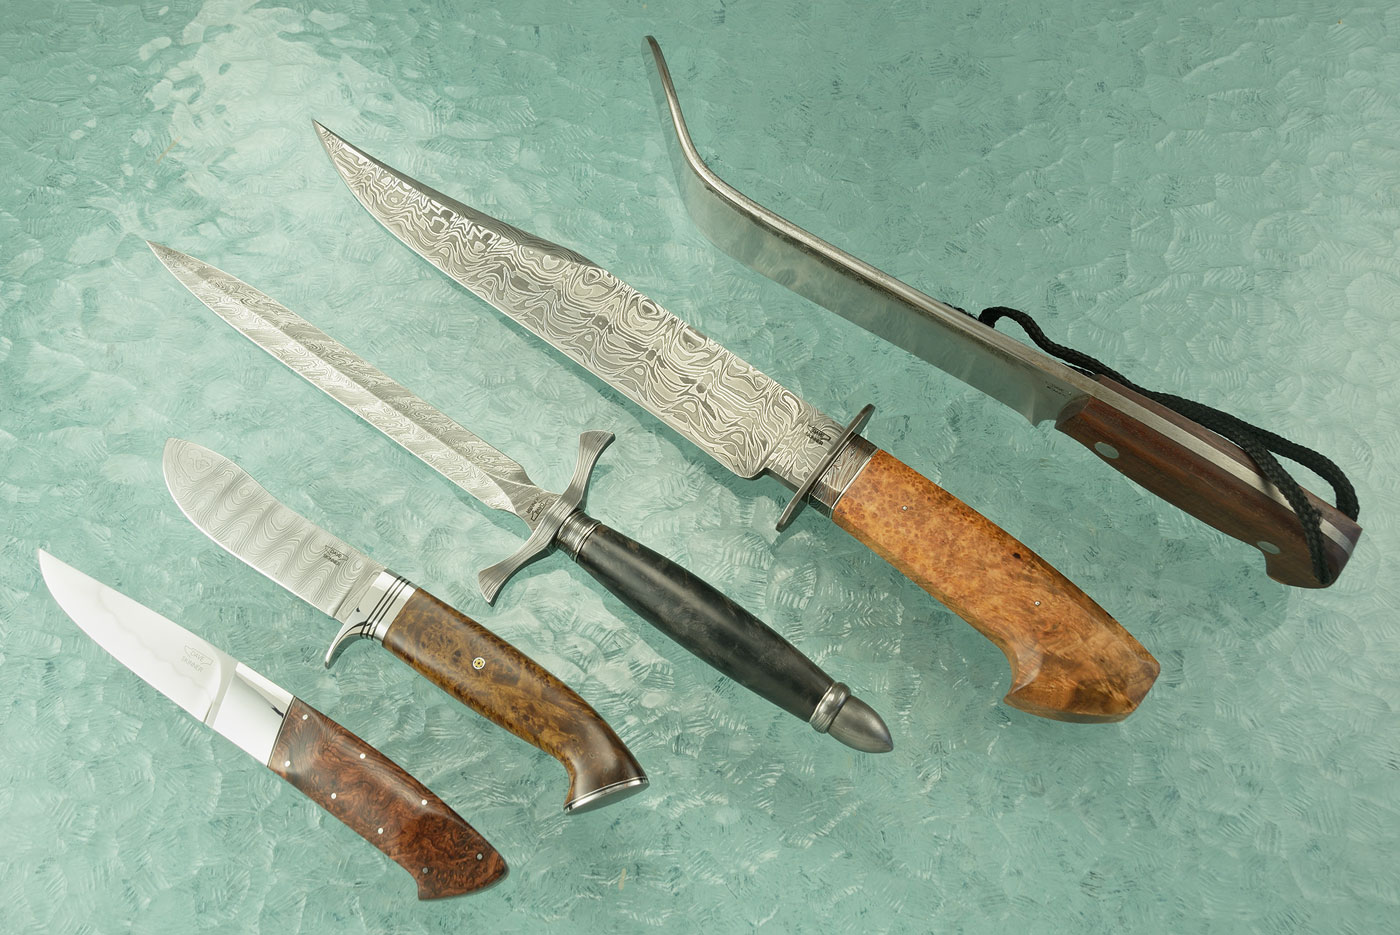 Knifemakers' Guild of Southern Africa Guild Set (4 Knives and Performance Test Blade)